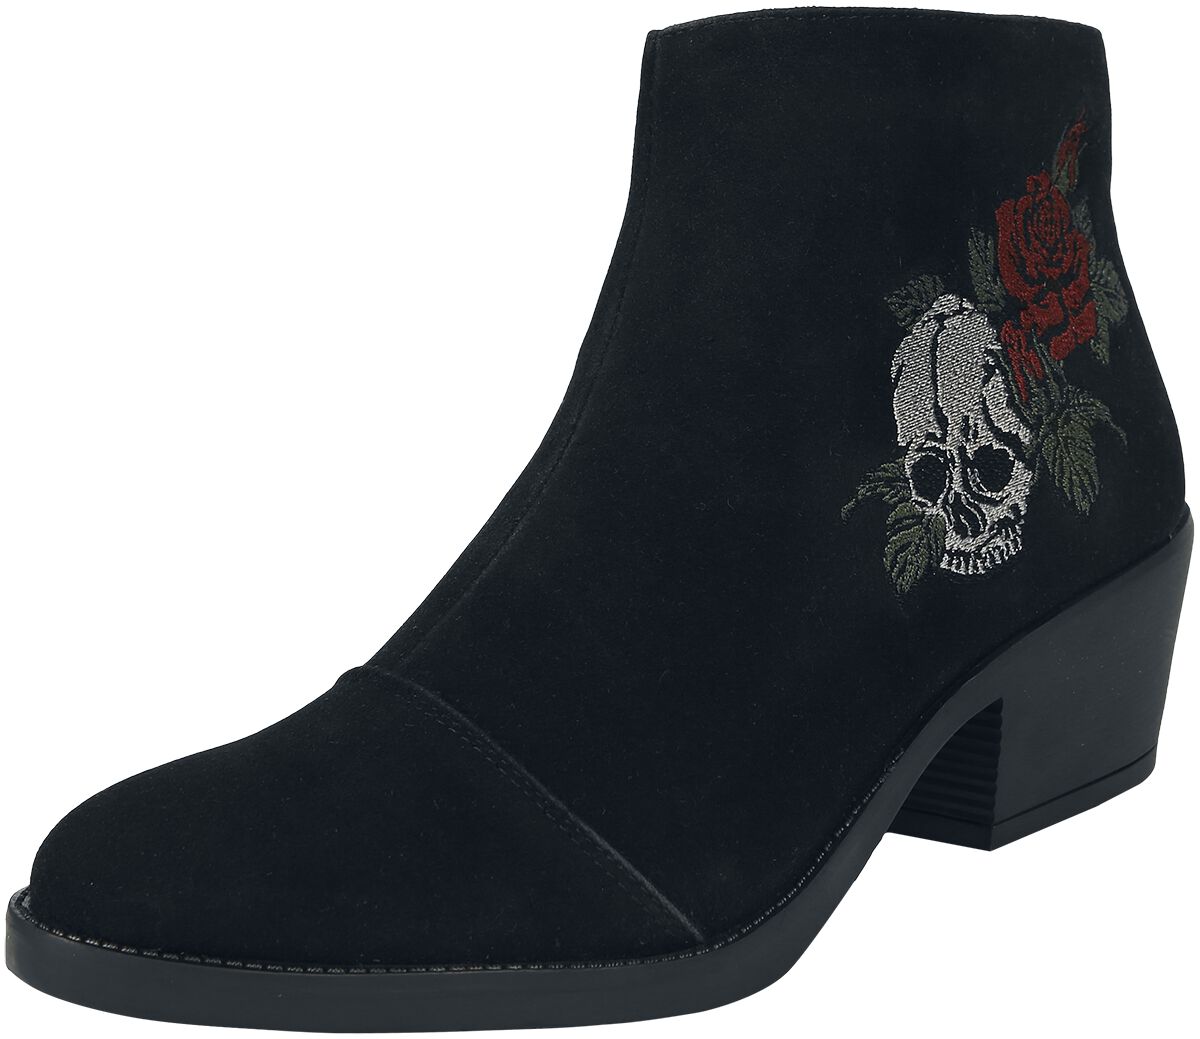 Rock Rebel by EMP Boot with Rose an Skull embroidery Stiefel schwarz in EU37